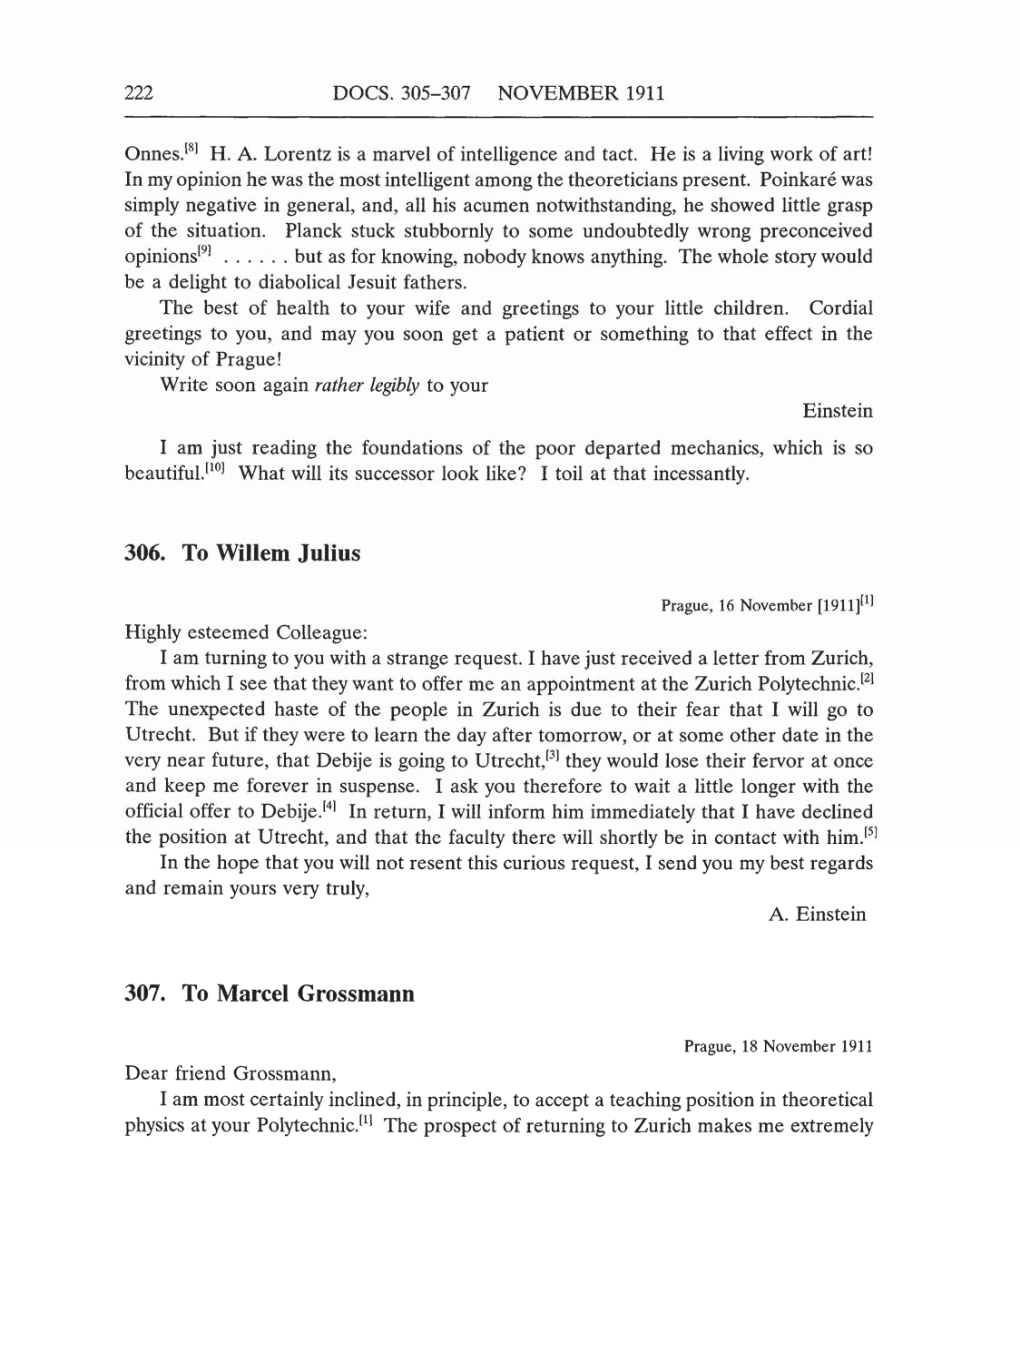 Volume 5: The Swiss Years: Correspondence, 1902-1914 (English translation supplement) page 222